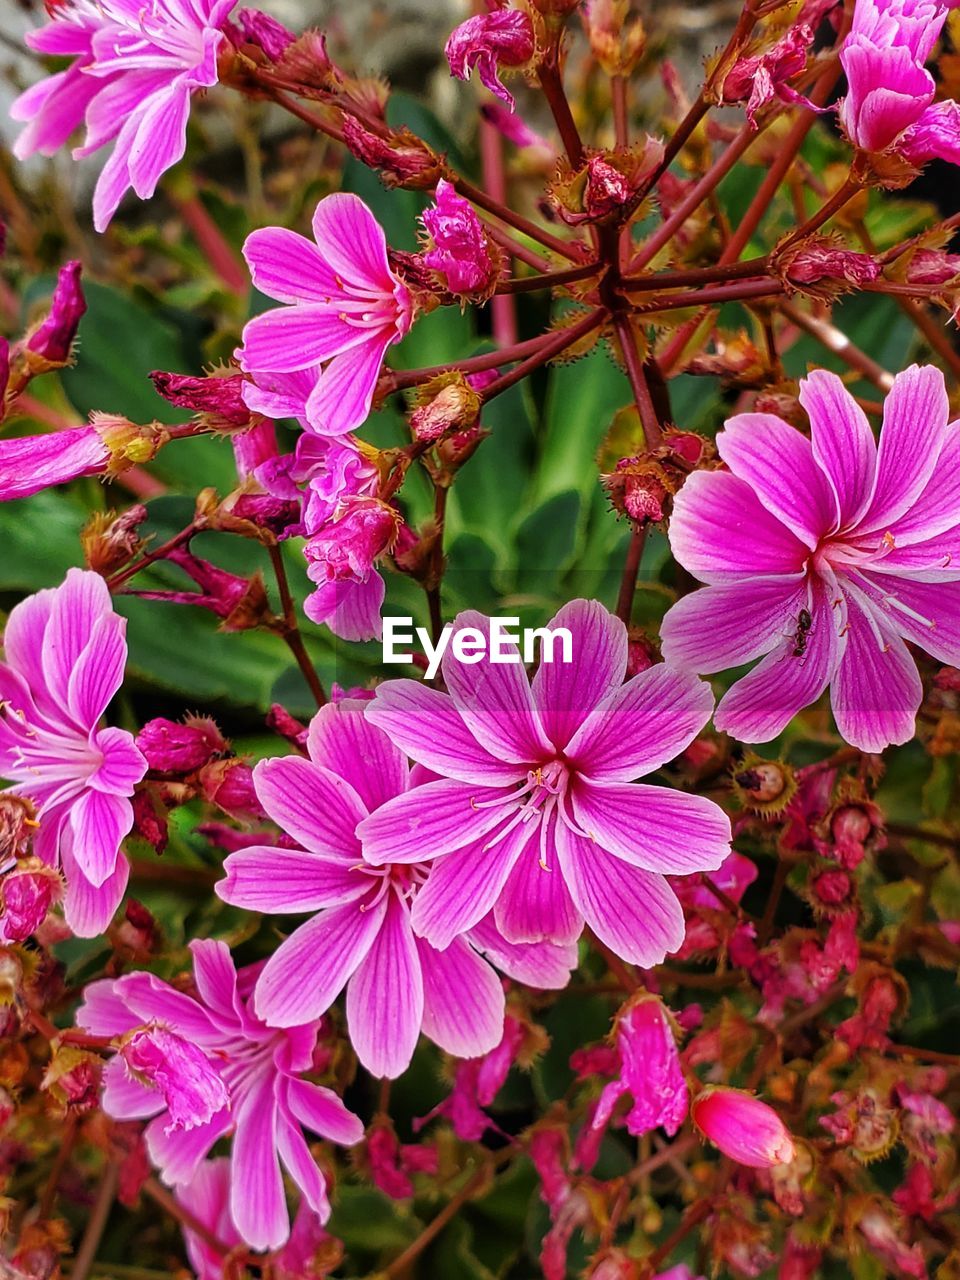 flower, flowering plant, plant, beauty in nature, freshness, pink, petal, close-up, fragility, growth, flower head, inflorescence, nature, no people, blossom, day, botany, outdoors, springtime, plant part, leaf, focus on foreground, pollen